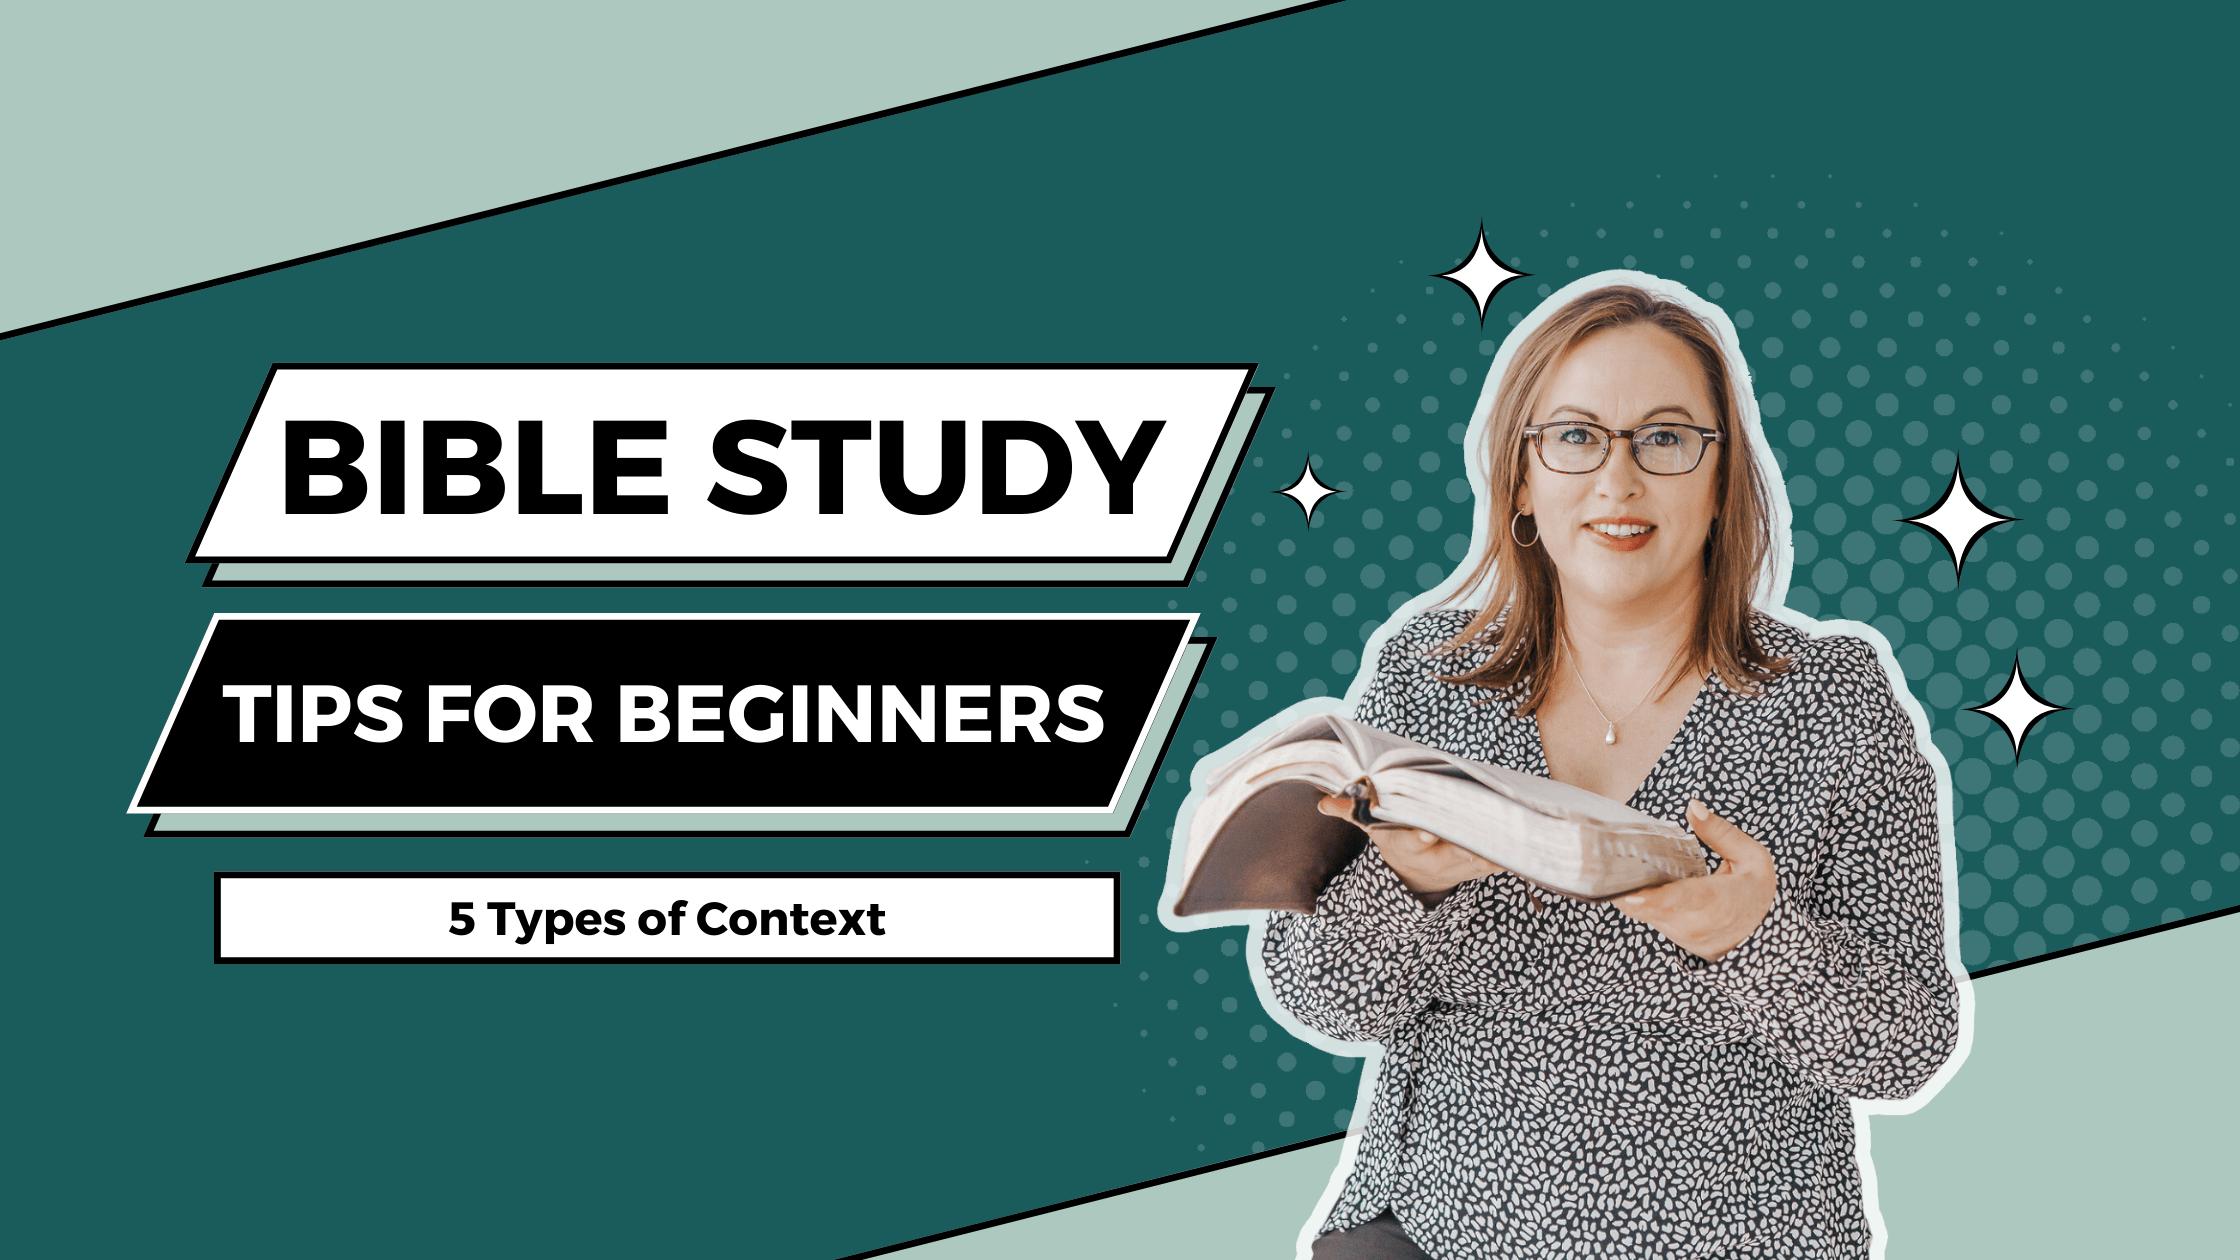 Bible study tips for beginners: Five types of context